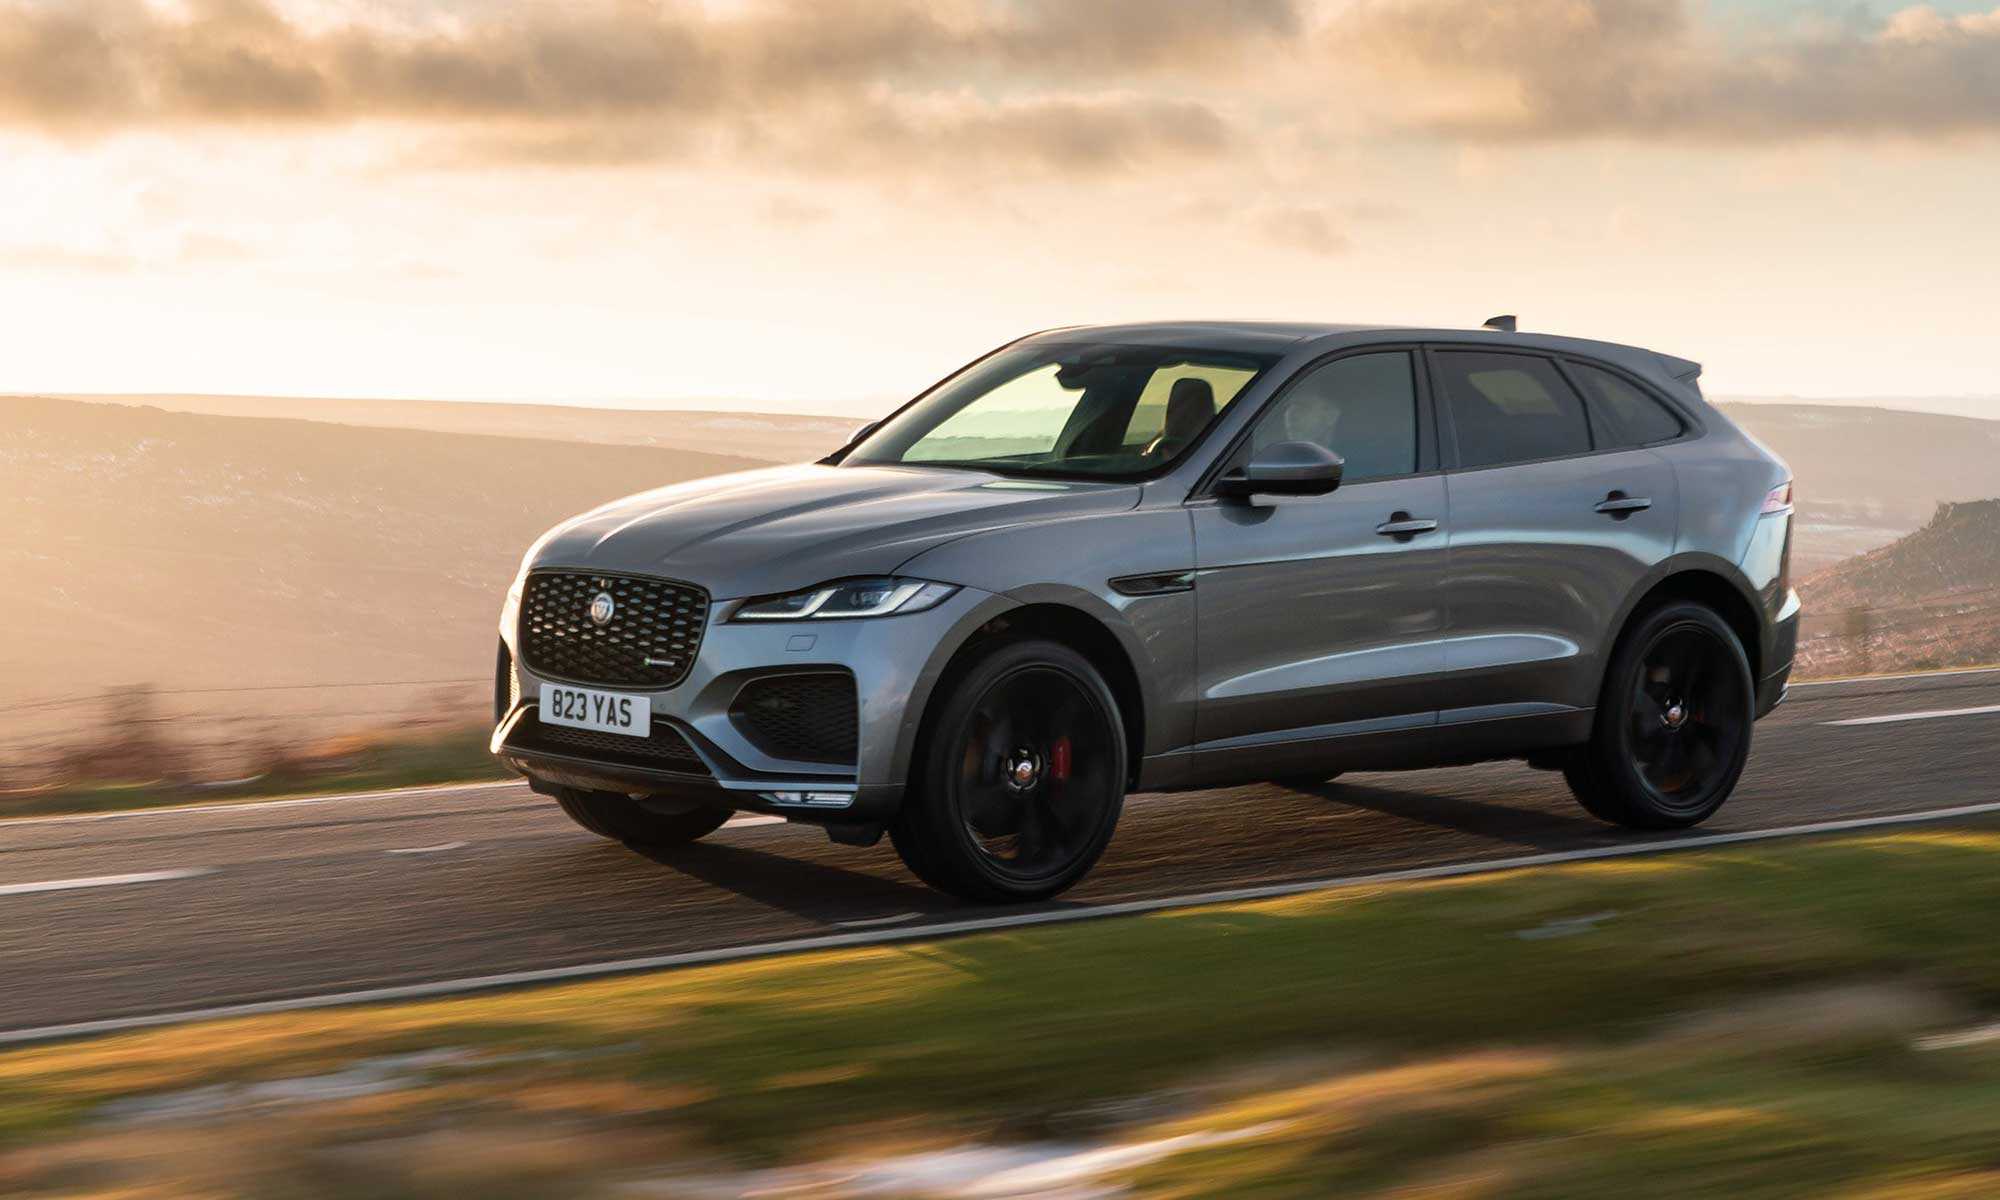 Jag f pace lifestyle image